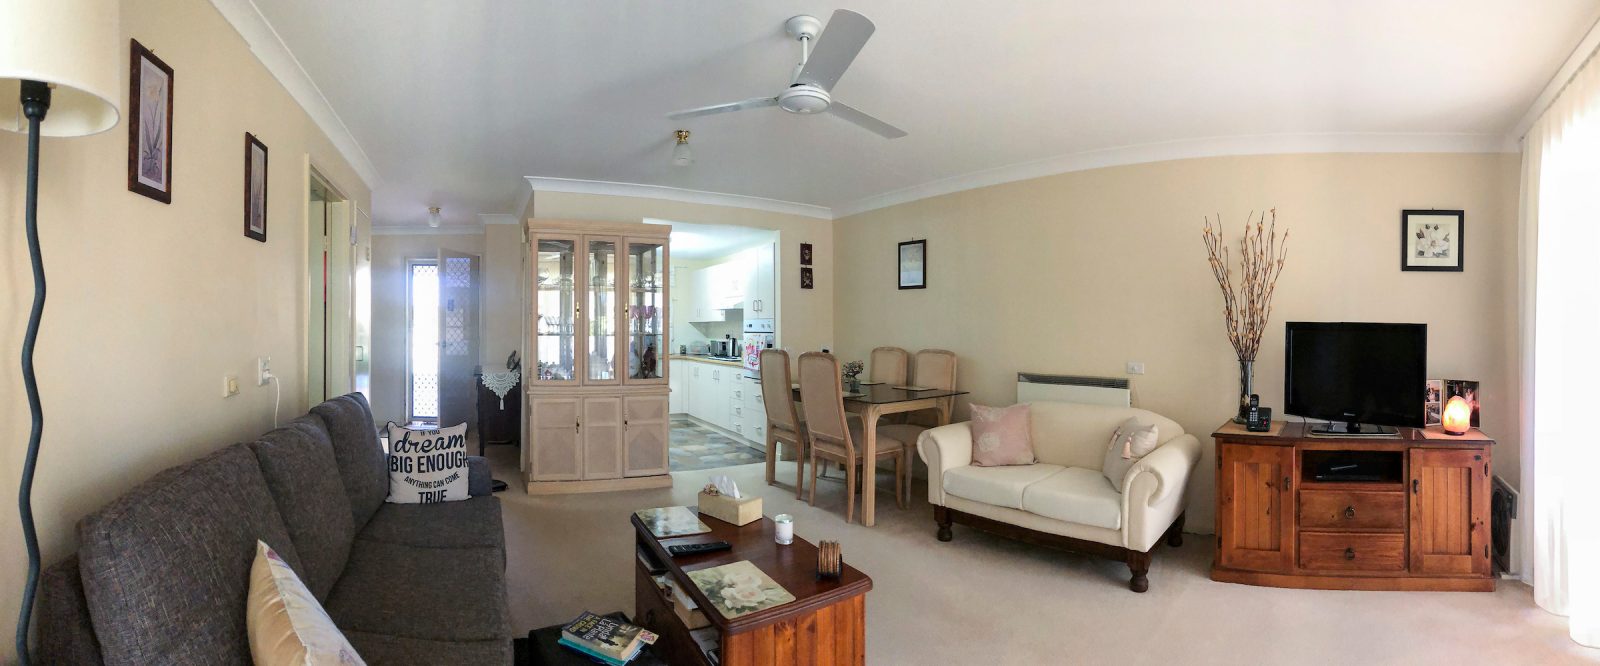 A comfortable, modern unit in Whiddon's Adamstown retirement village, one of the retirement villages found in Newcastle.